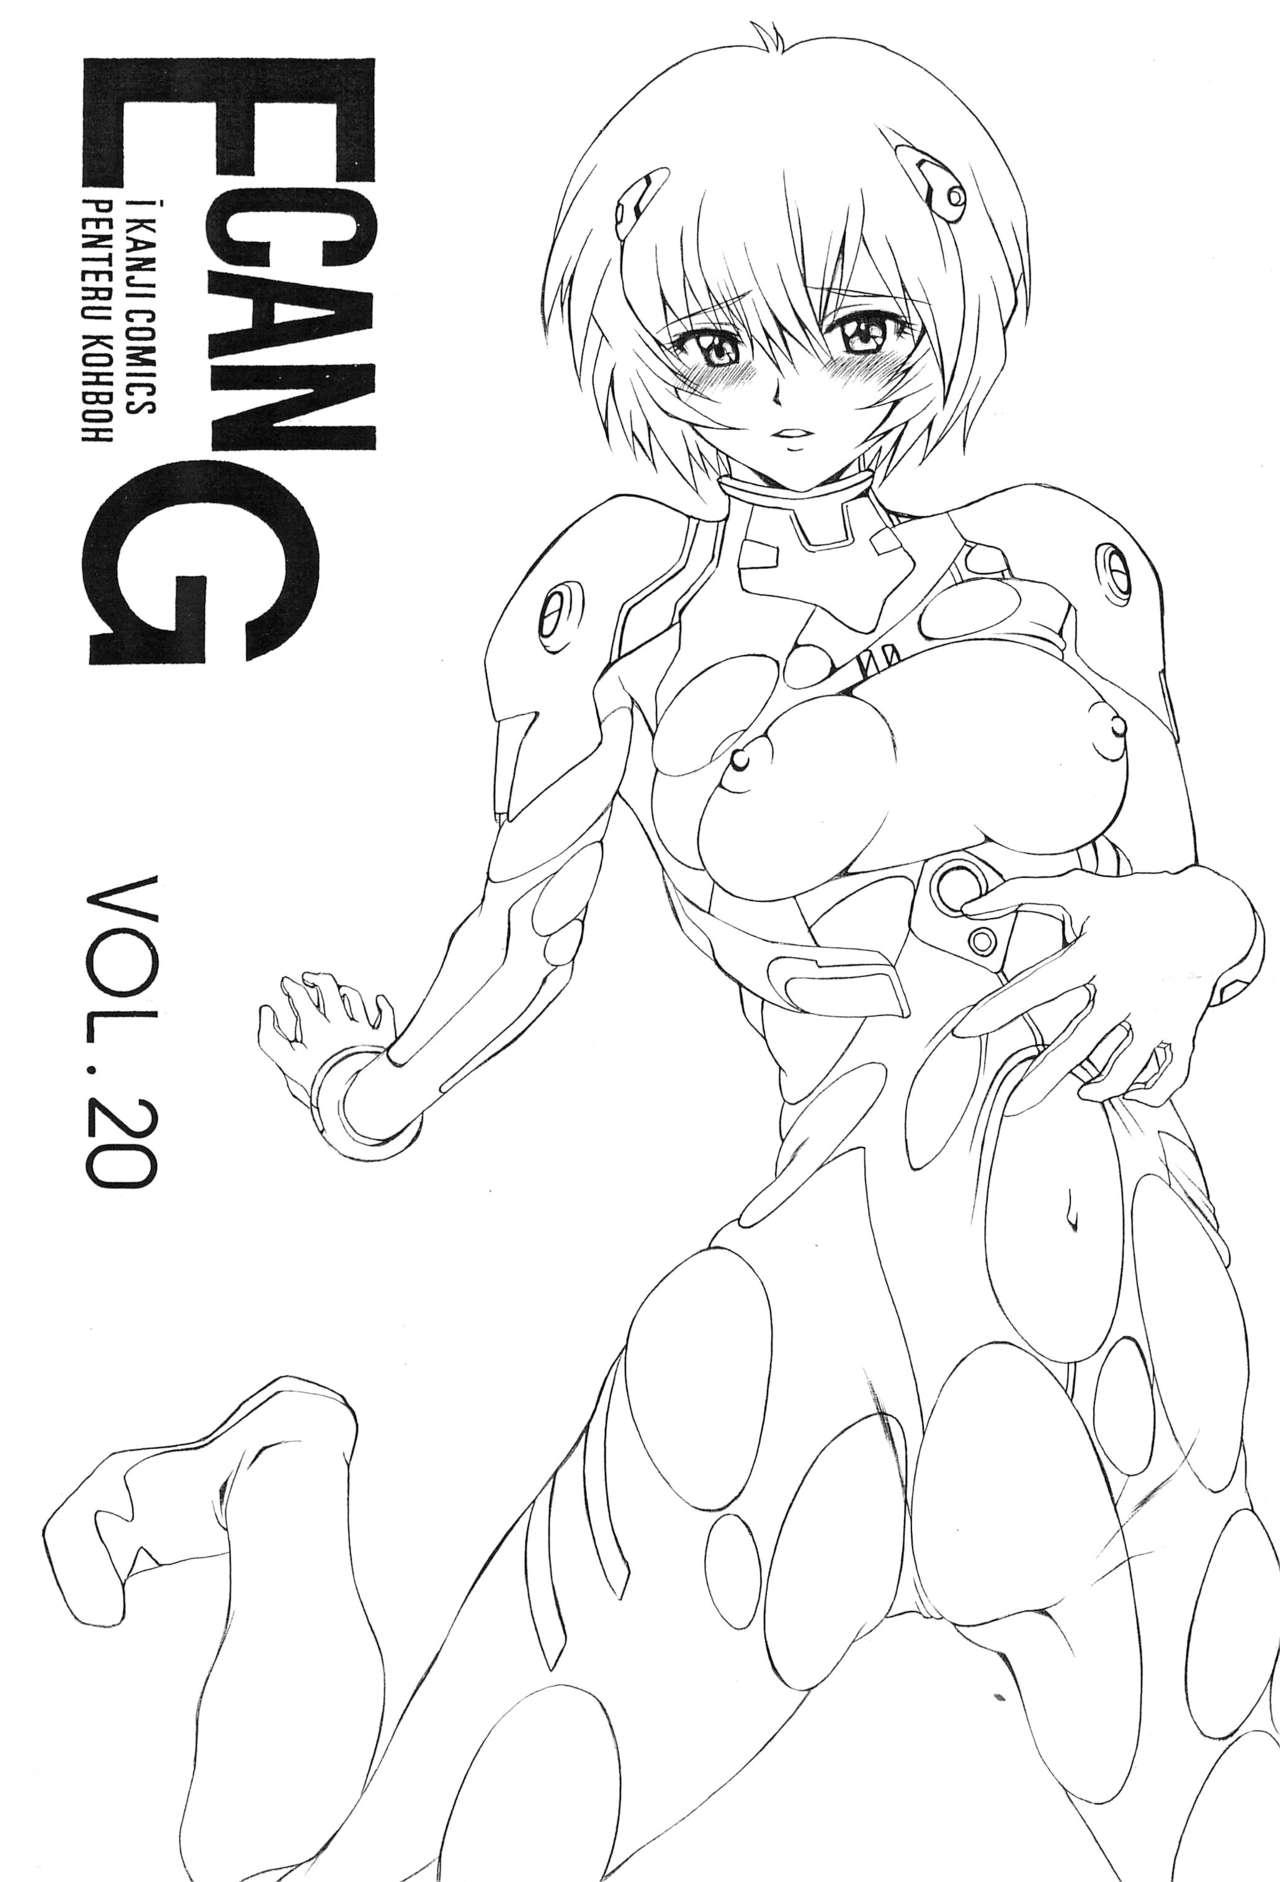 Anime E can G vol.20 - Neon genesis evangelion Culo - Page 1